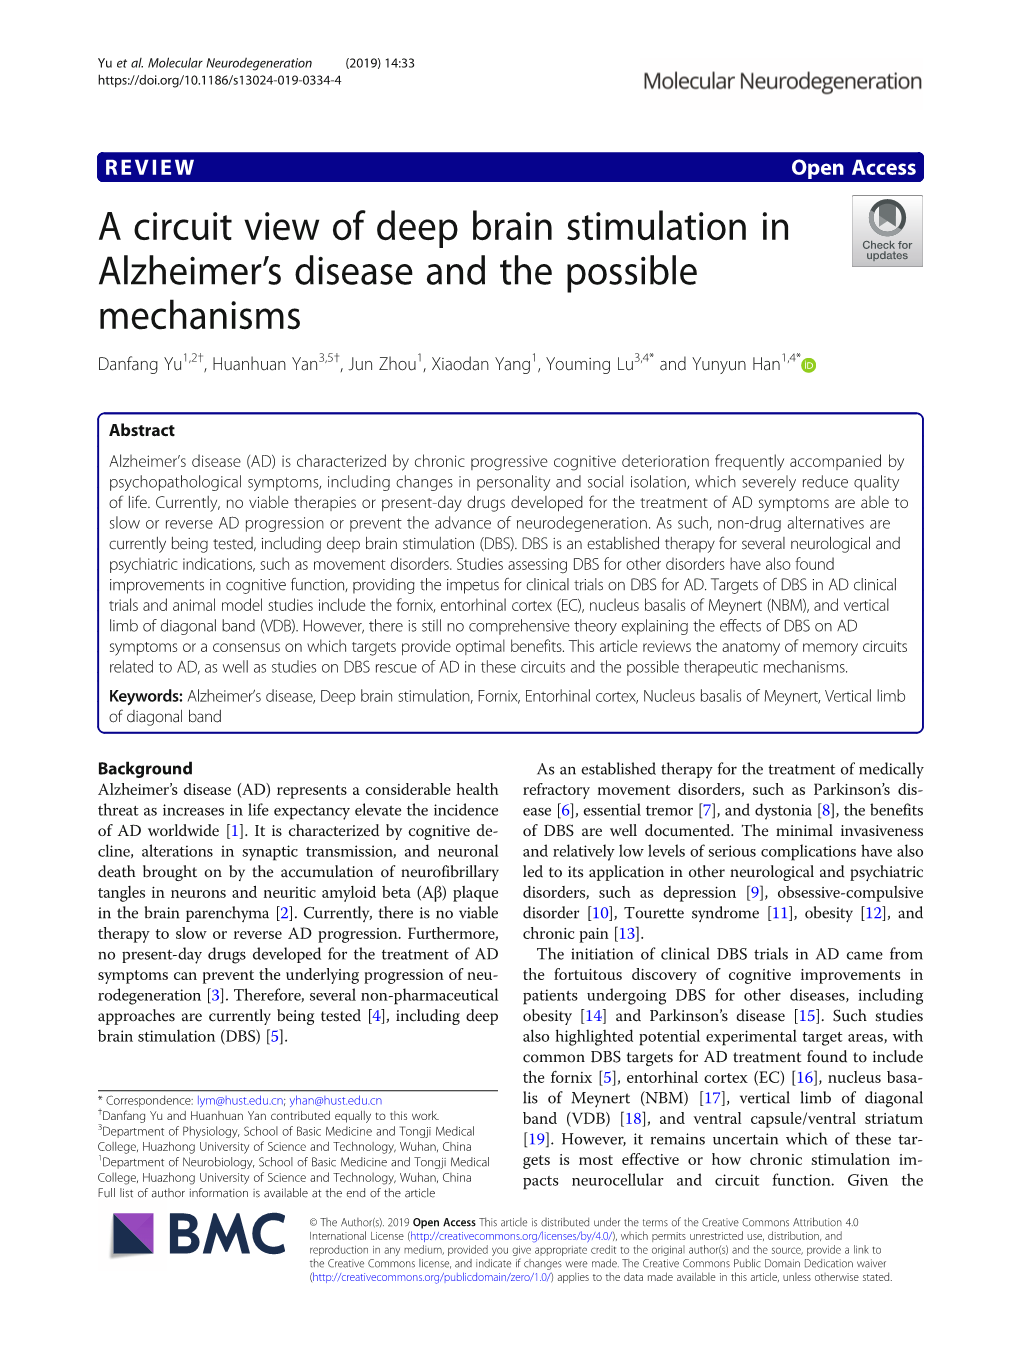 A Circuit View of Deep Brain Stimulation in Alzheimer's Disease and The